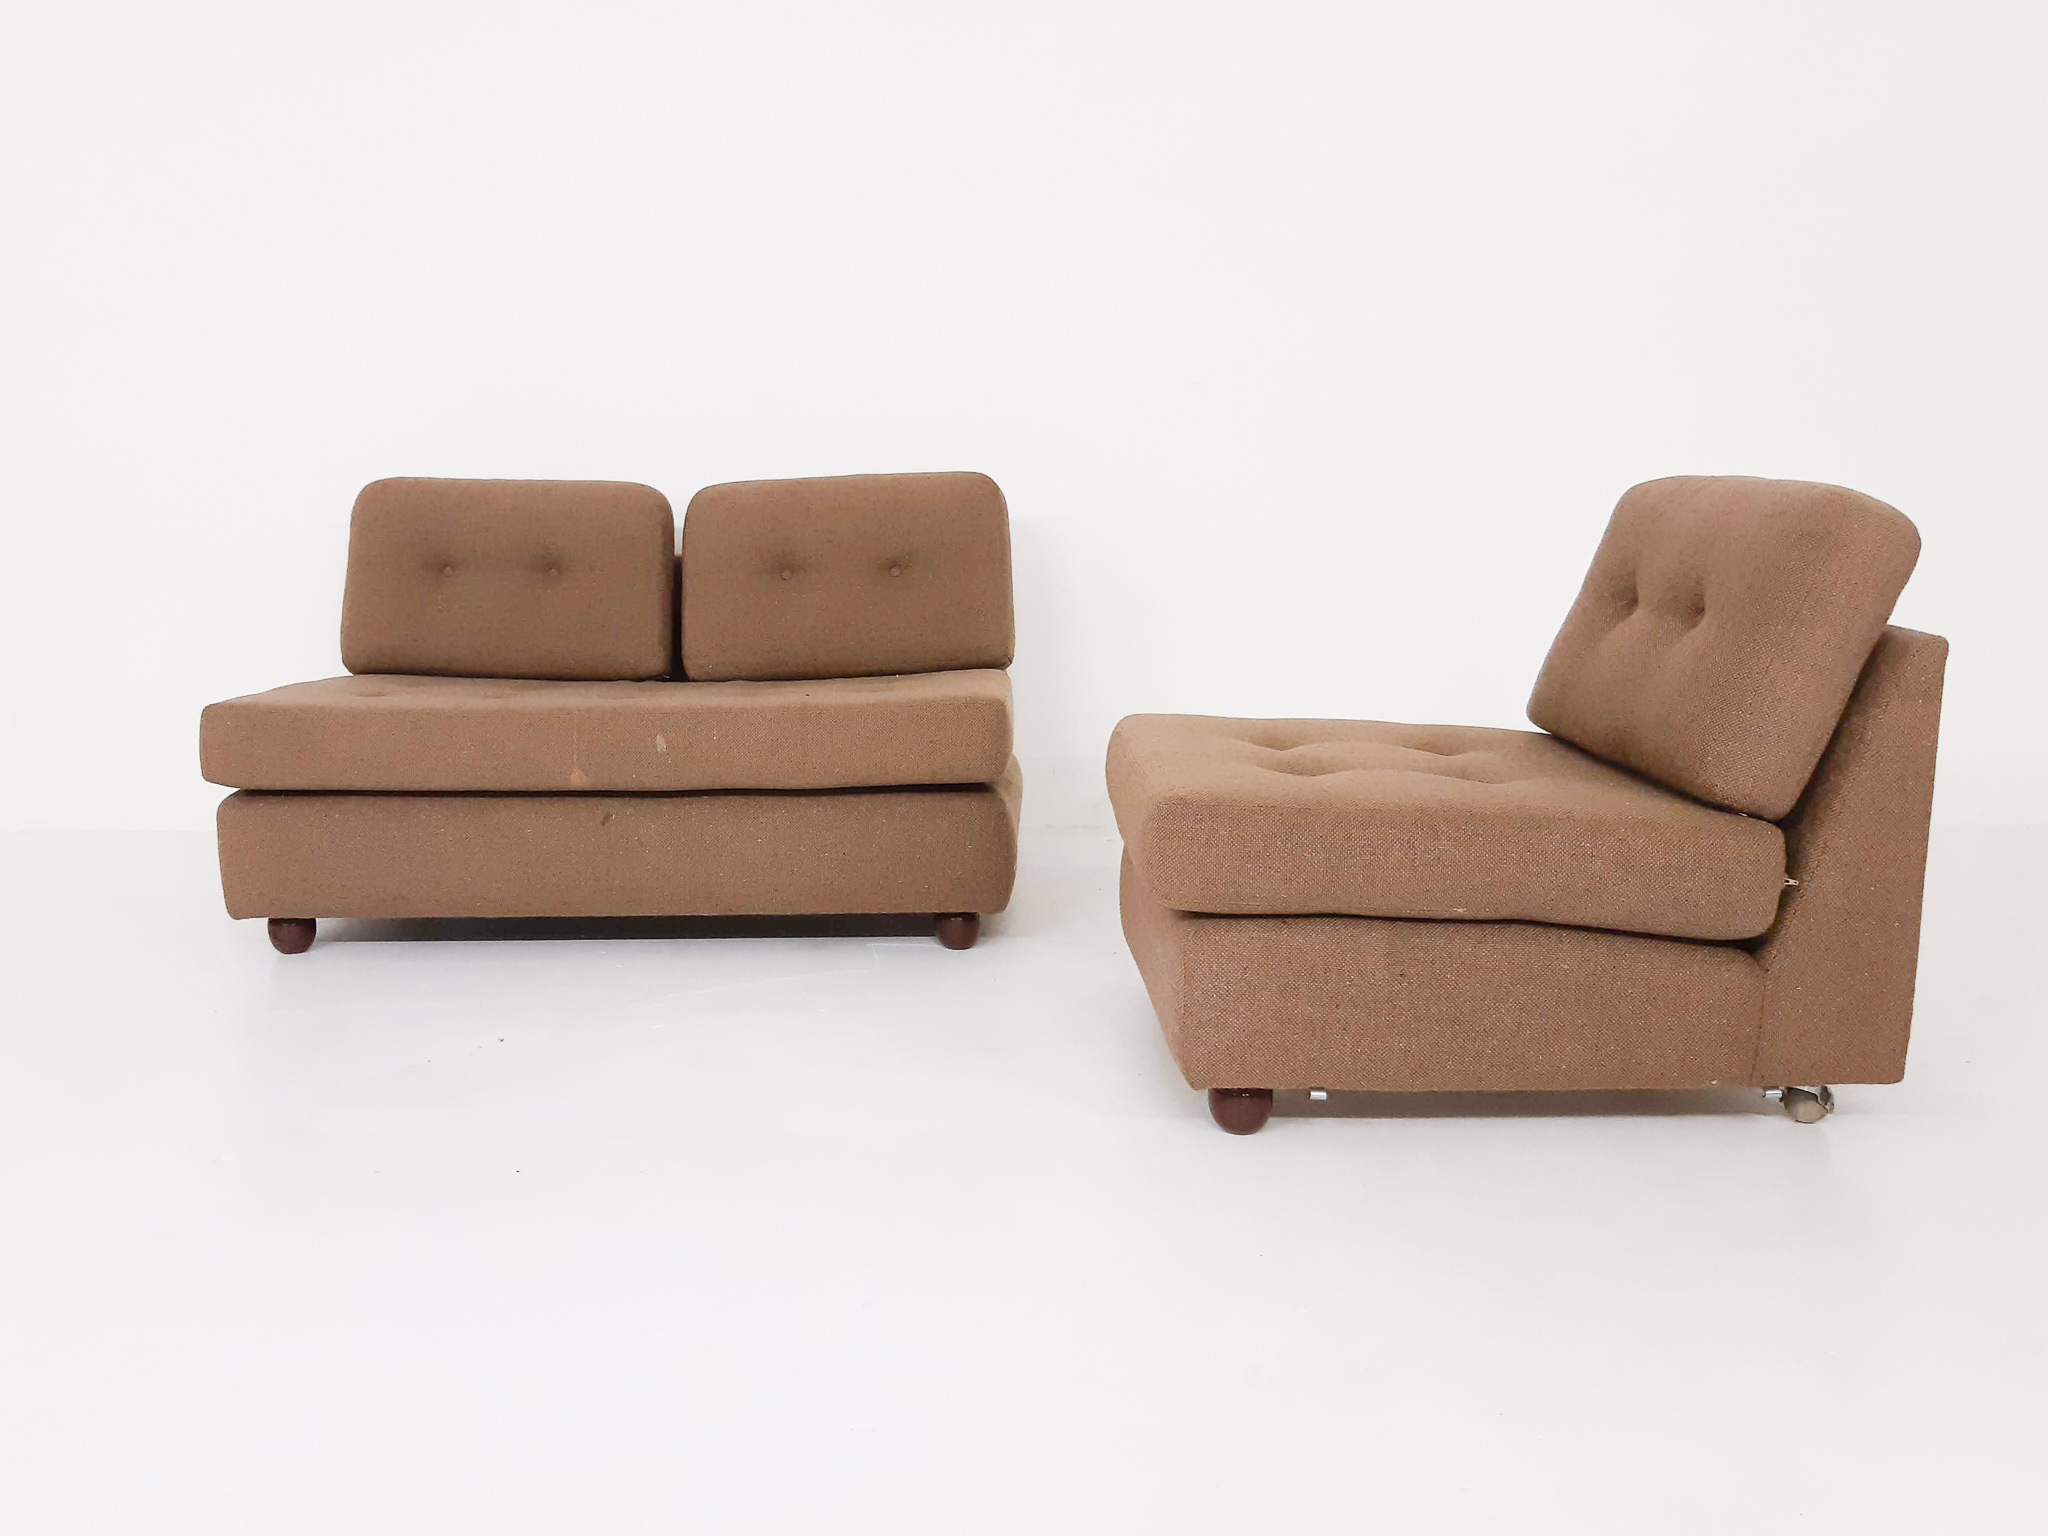 Sofas | Buy Vintage Design Seating at Zo Goed Als Oud